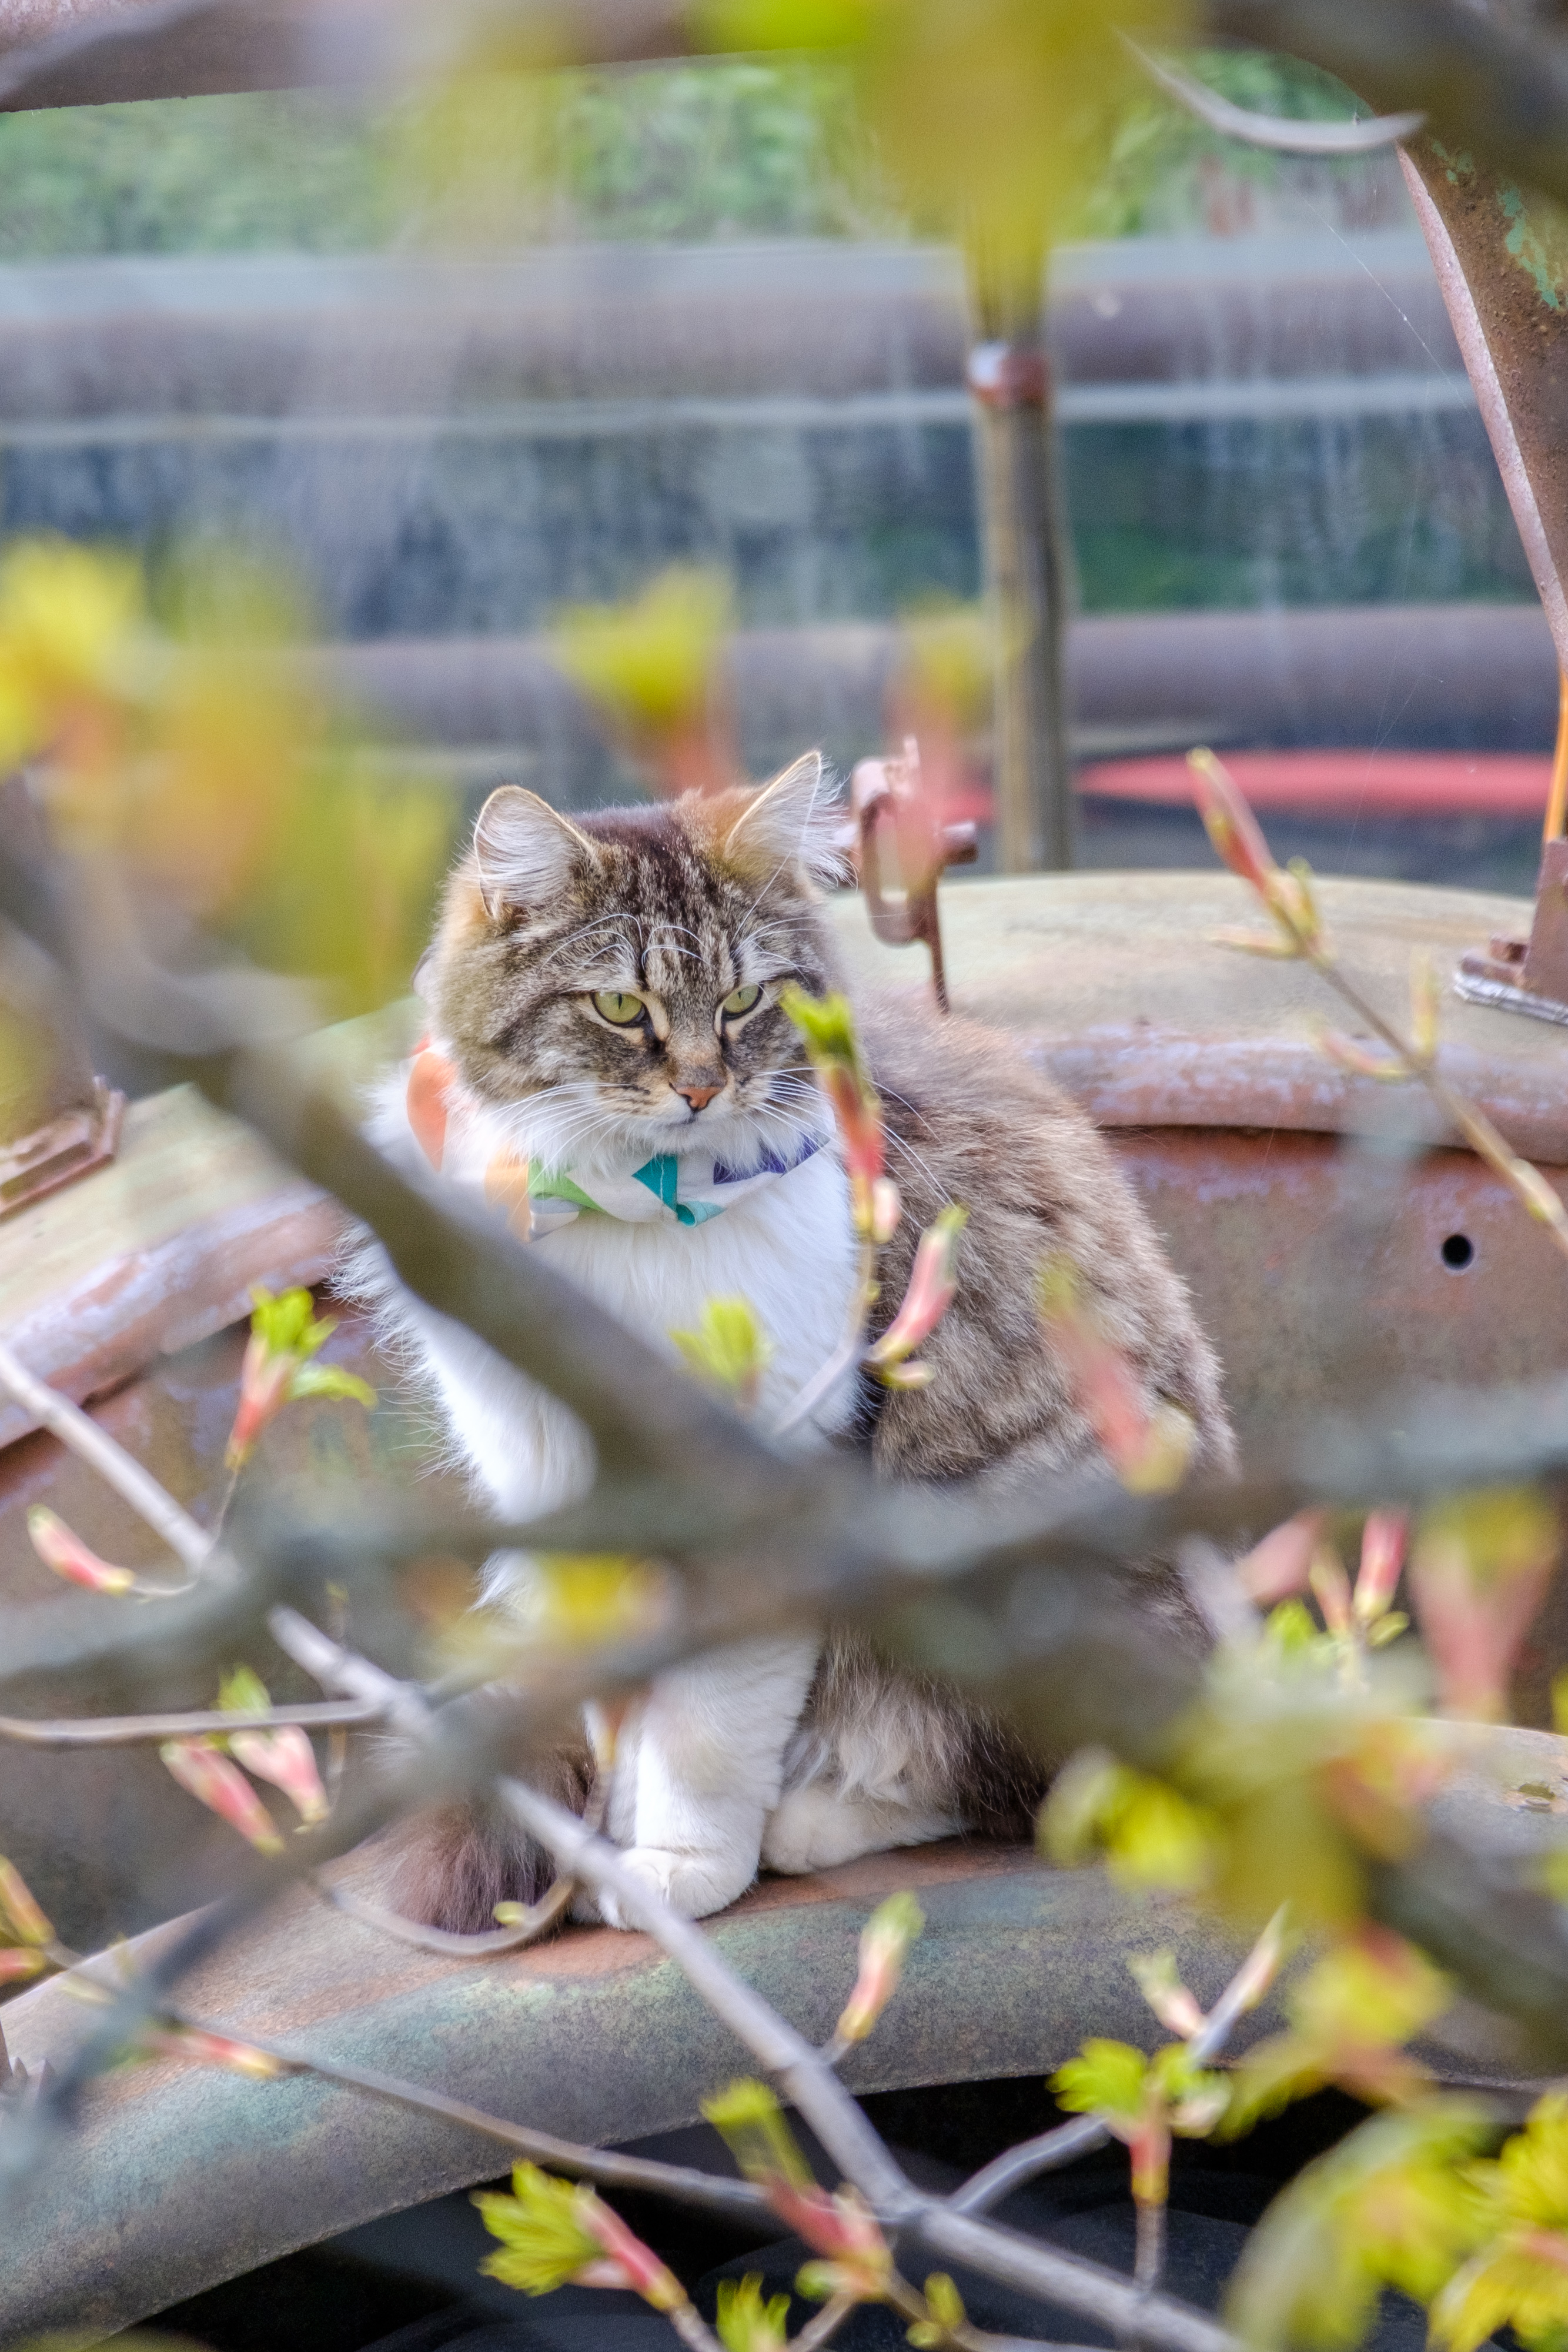 A view through some tree branches of a cat sitting on a rusty tractor. The cat has a colourful collar on and is inspecting his environment.